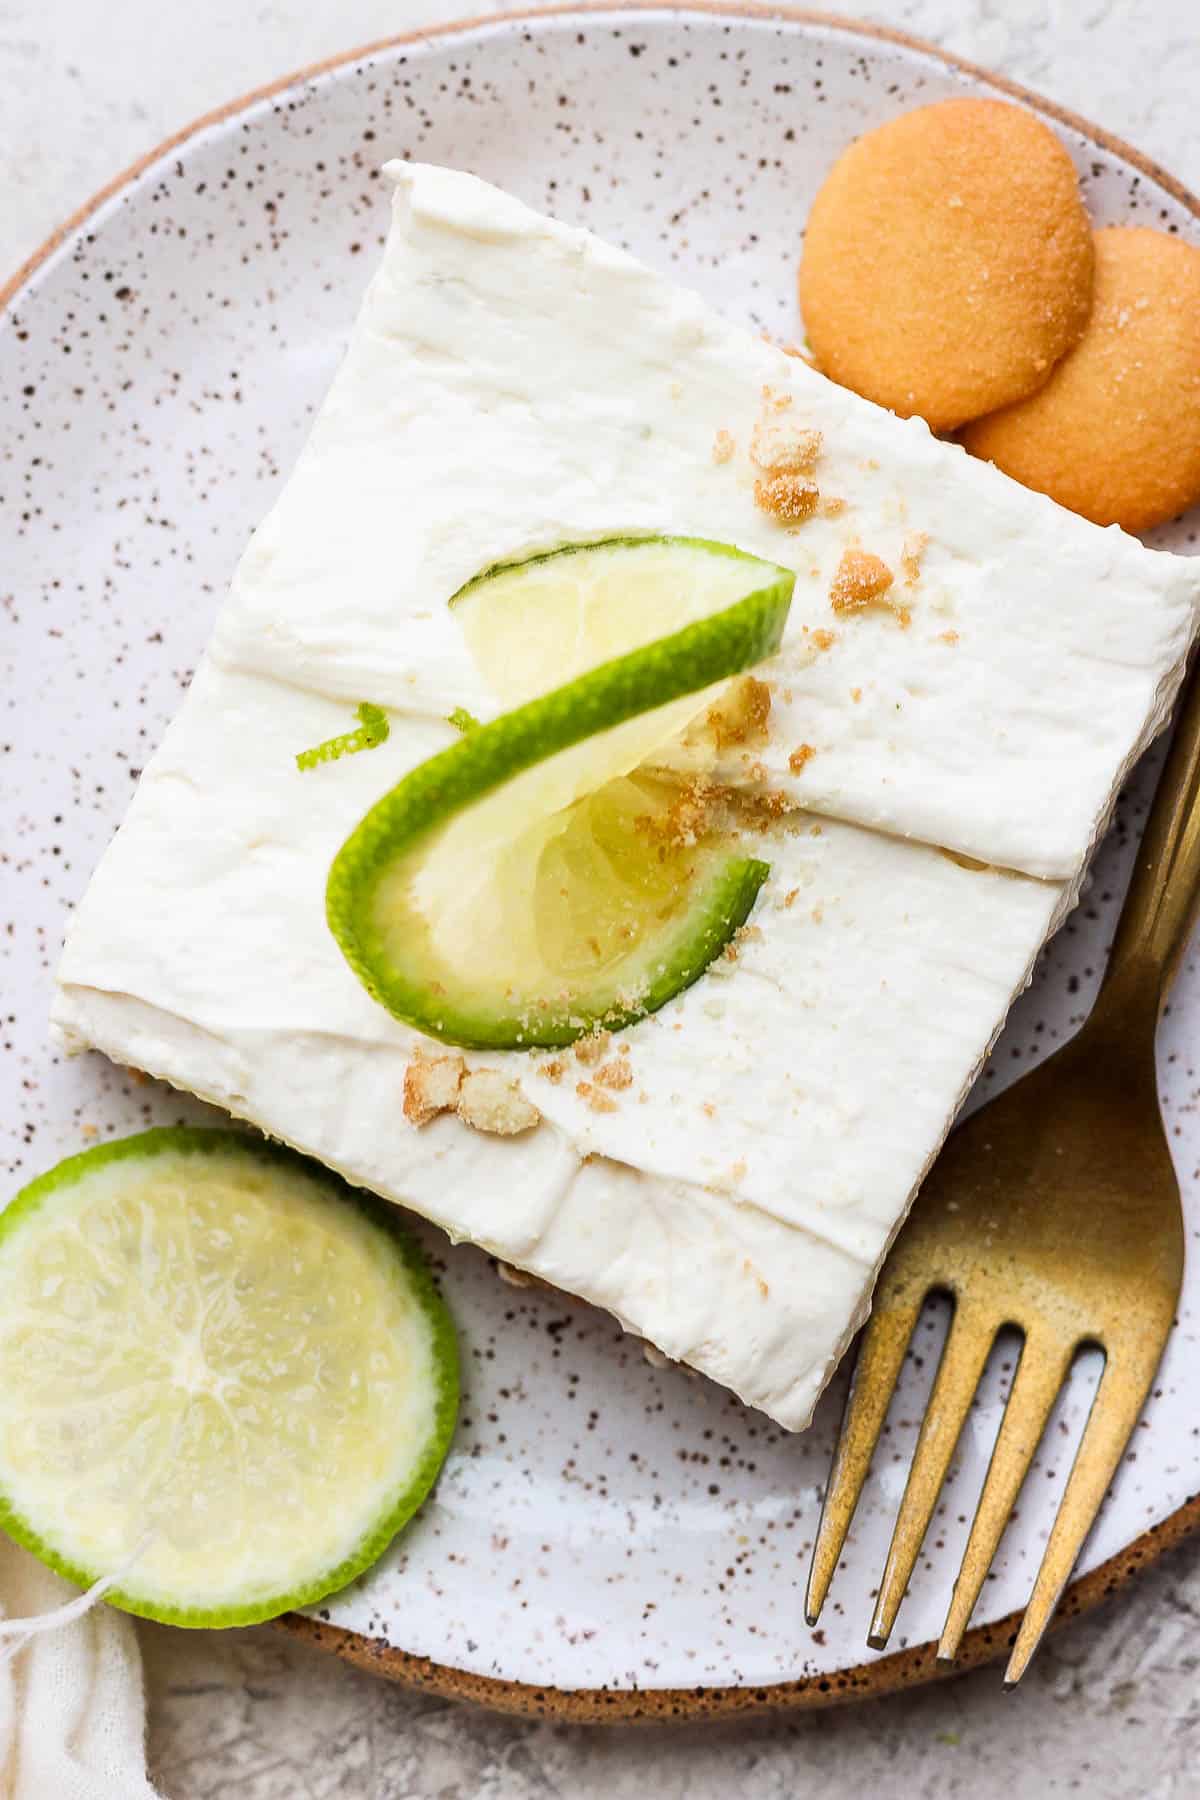 A key lime cheesecake bar on a plate topped with a slice of lime and crumbled vanilla wafers.